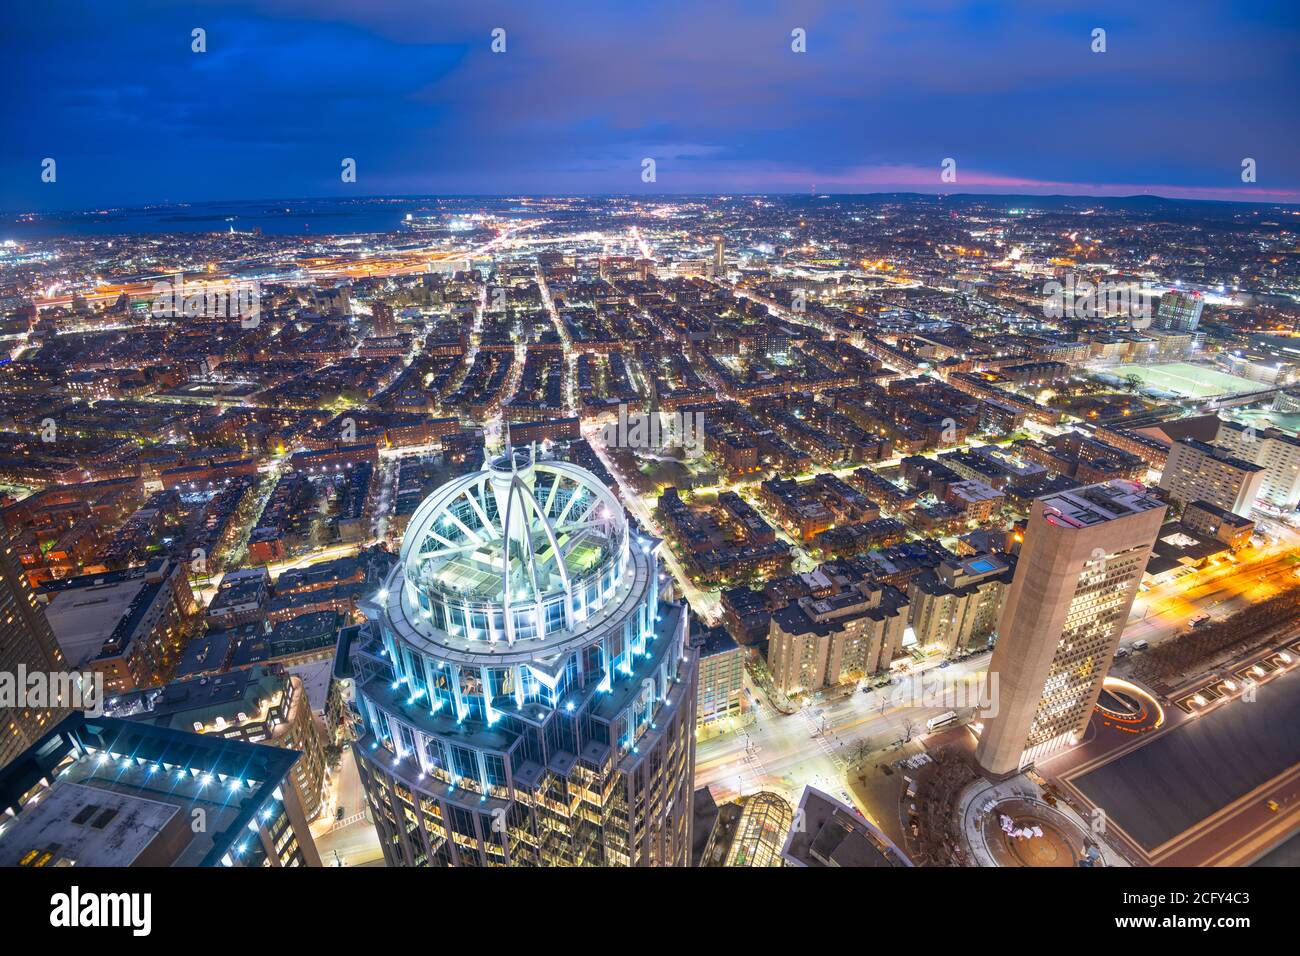 Aerial view of South End in Boston, Massachusetts, USA at night. Stock Photo